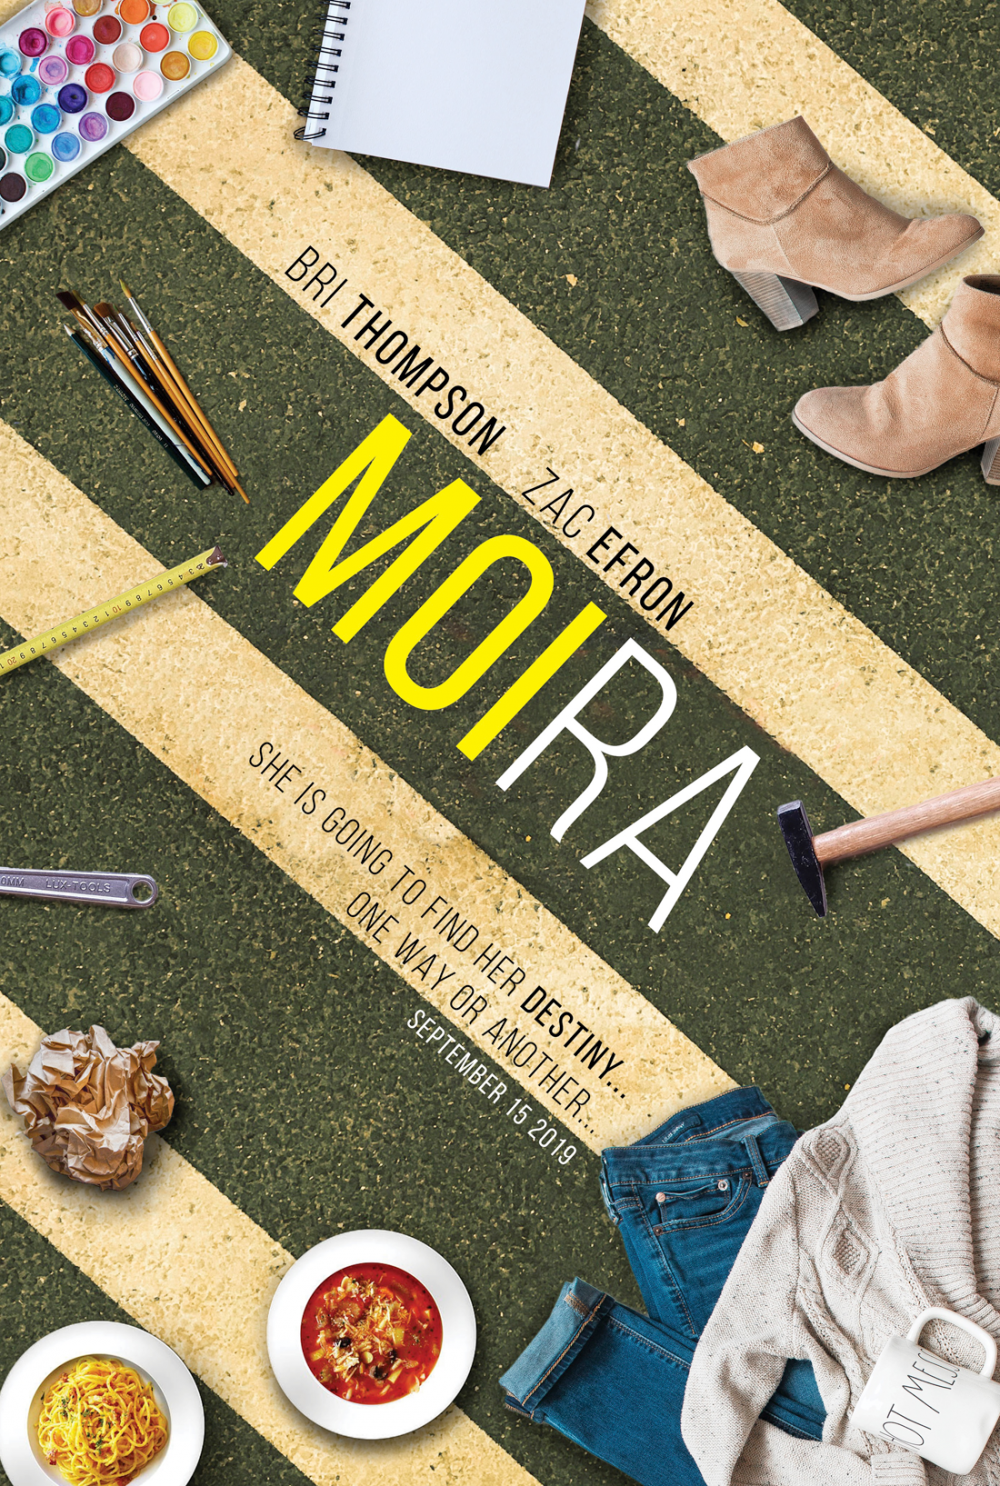 Moira Movie Posters 2